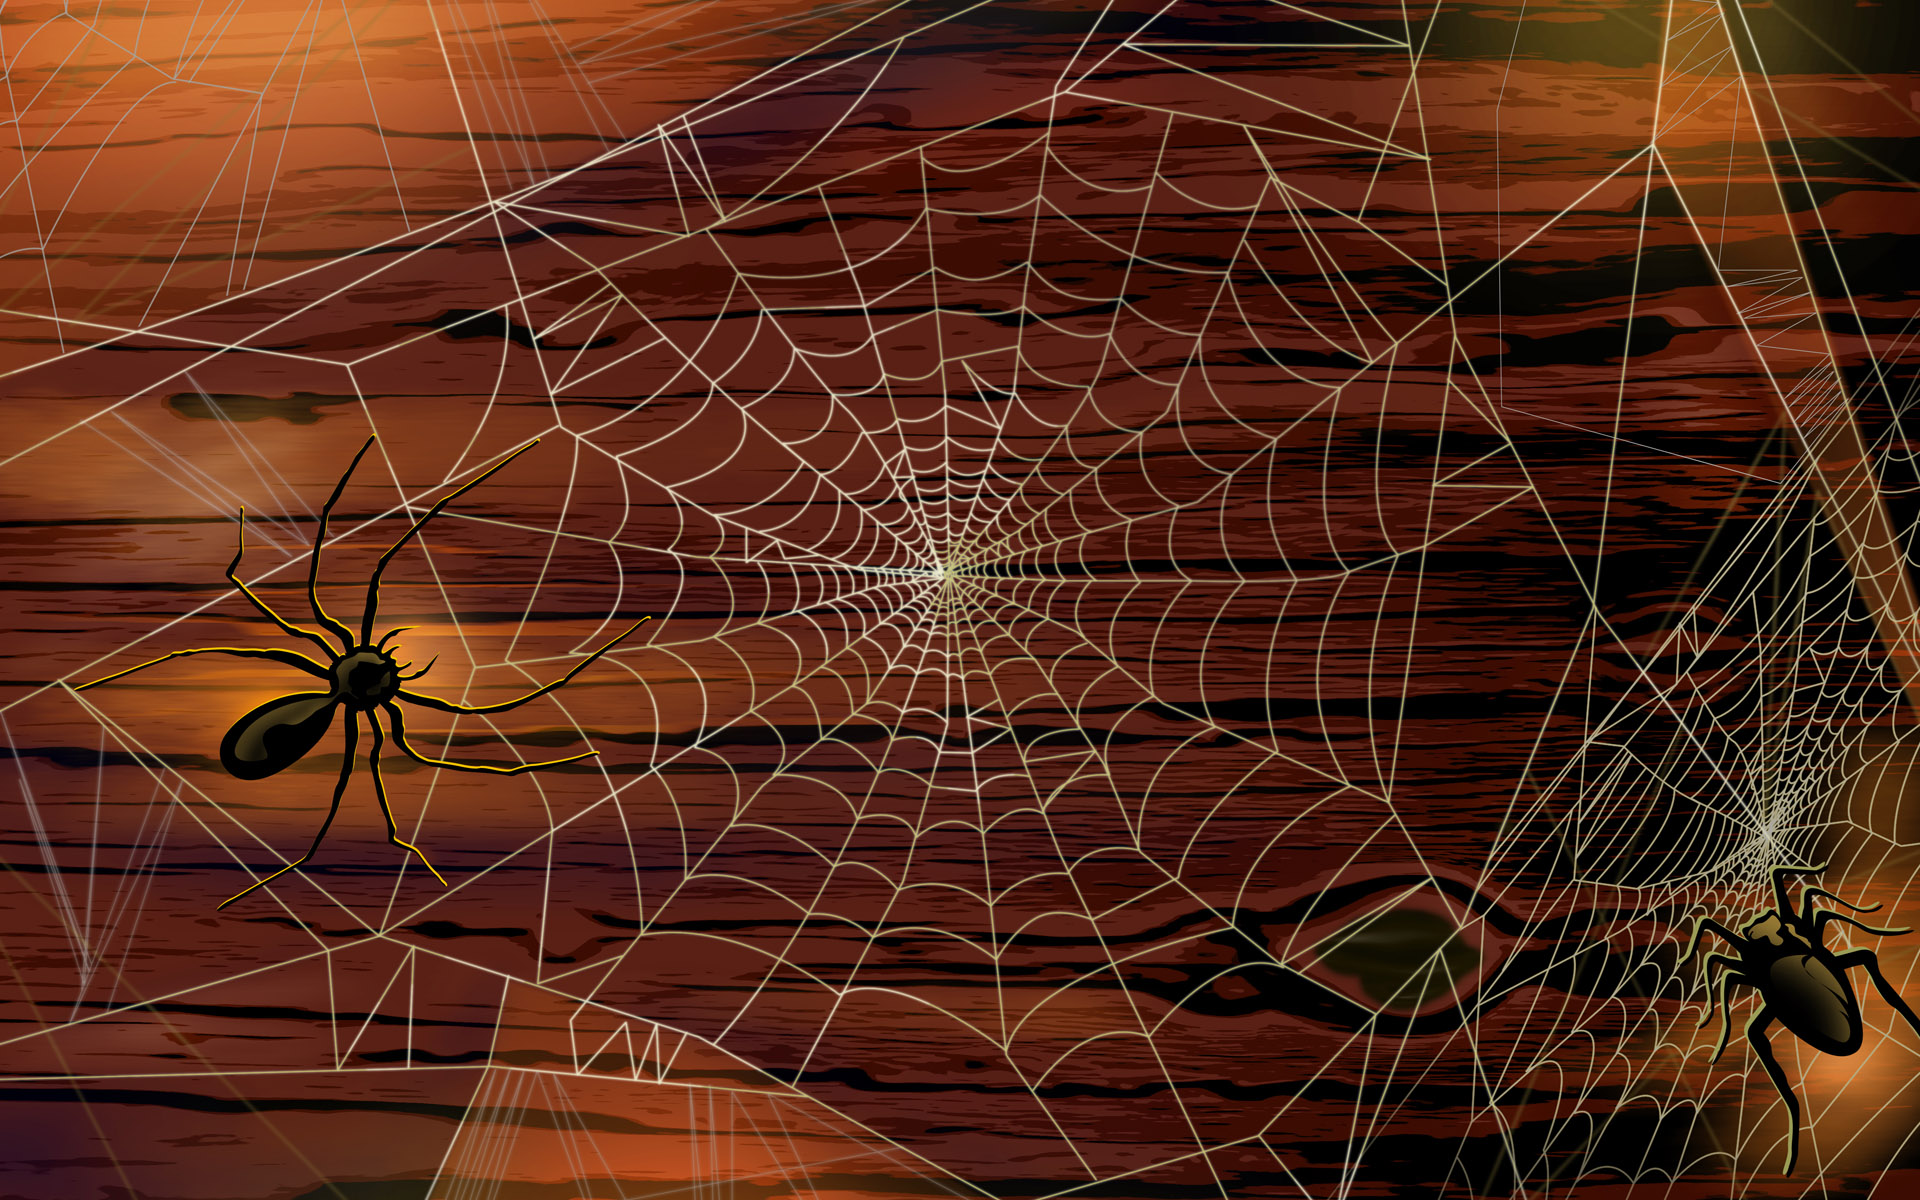 Scary Halloween HD Wallpaper Pumpkins Witches Spider Web